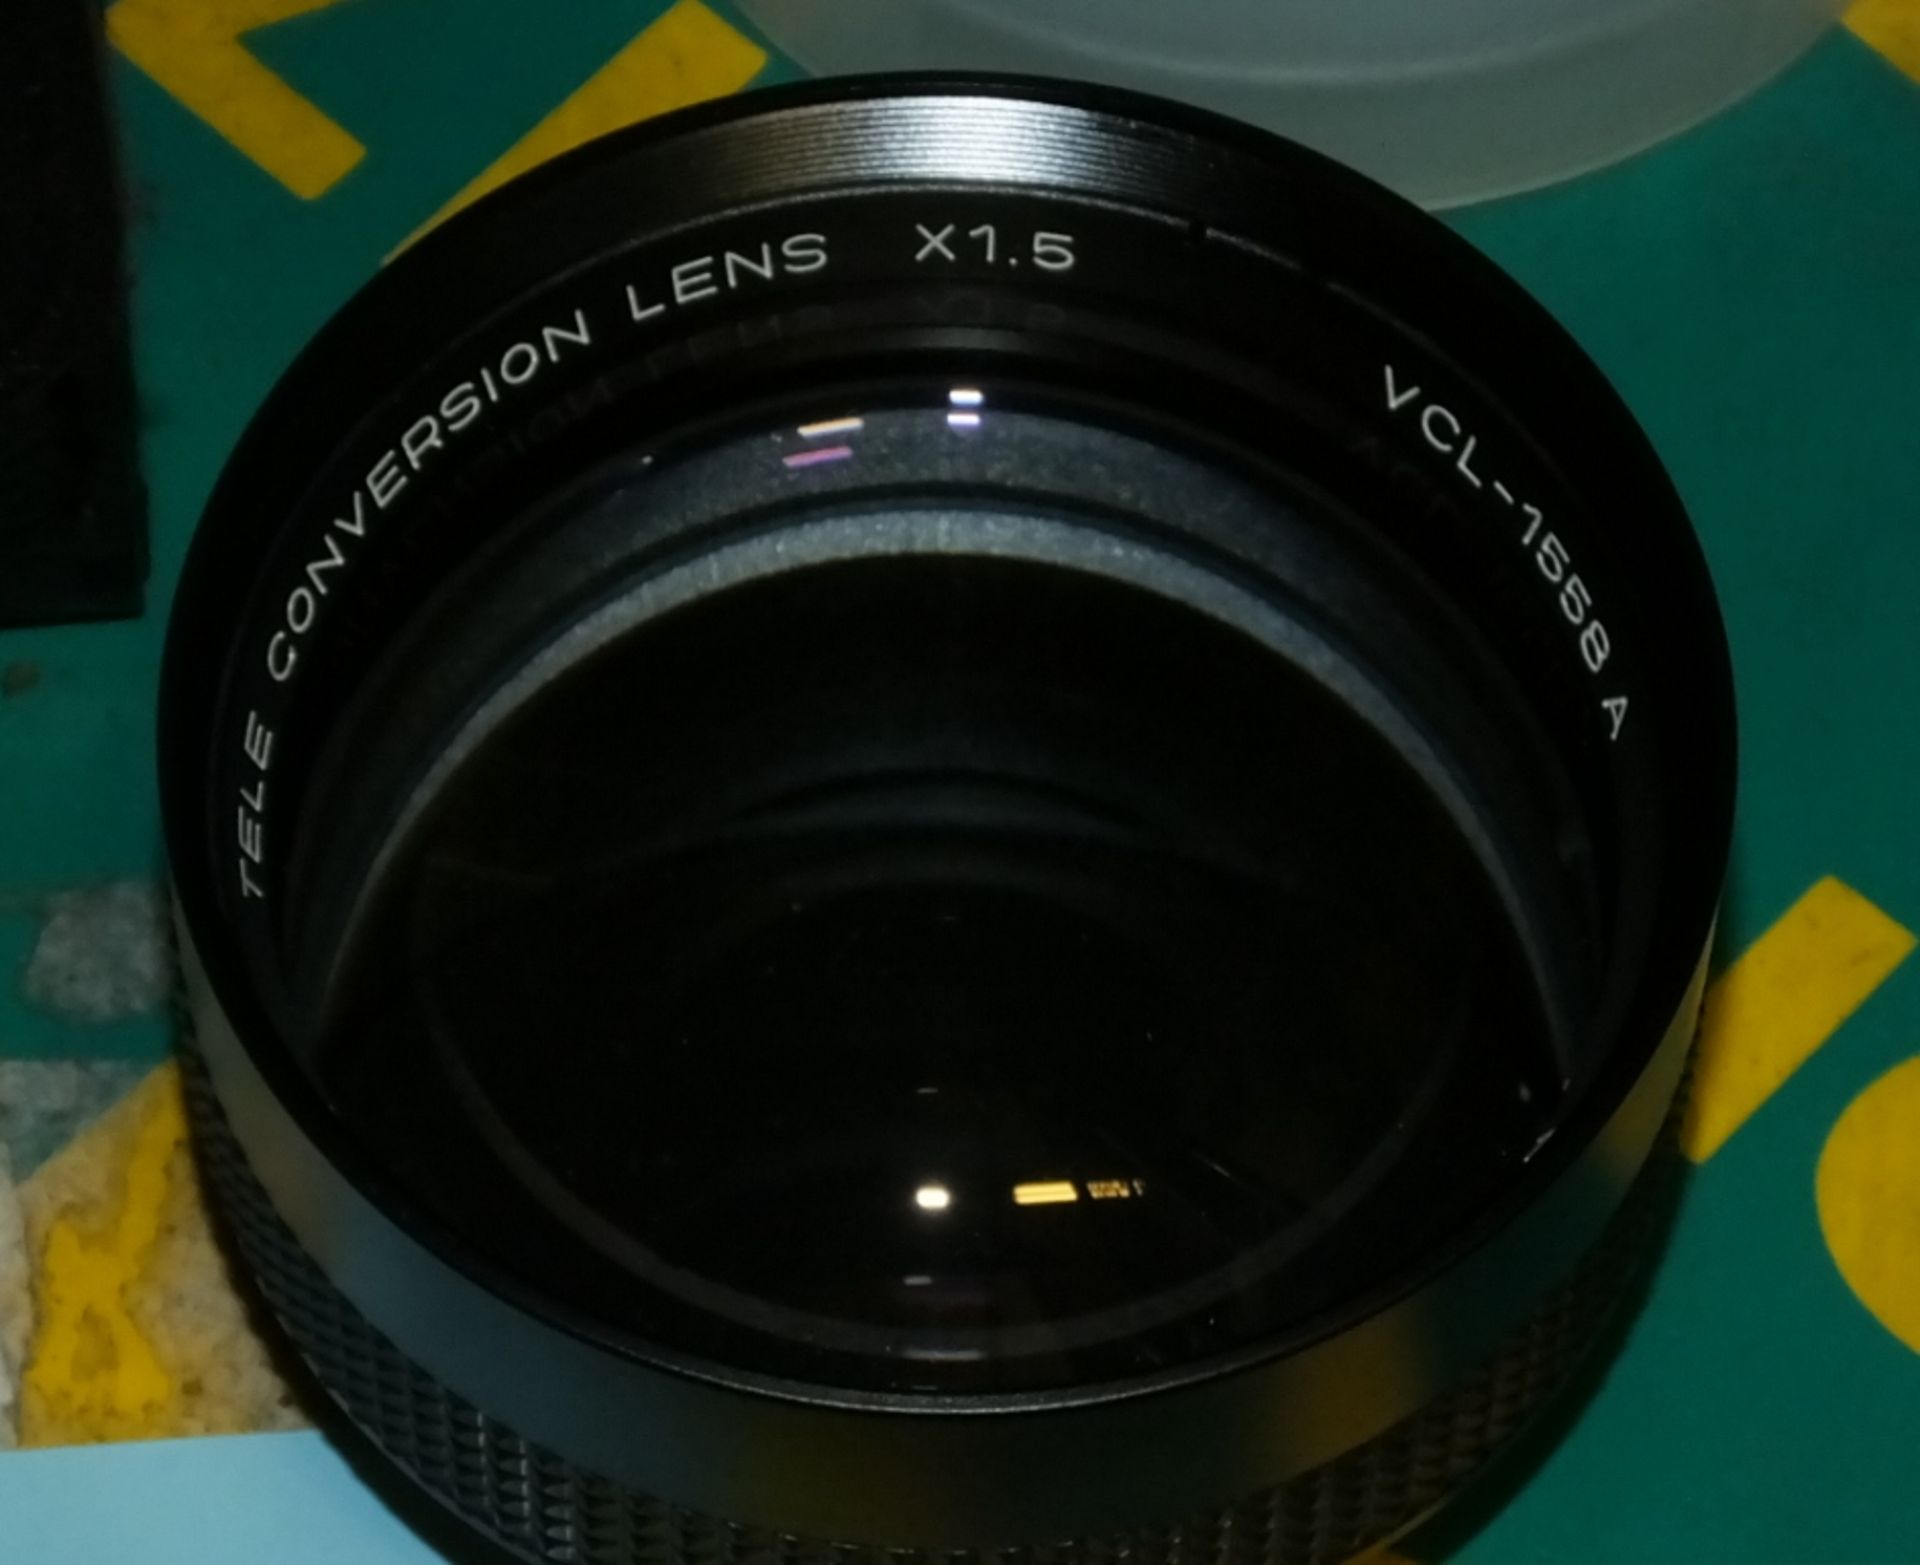 Sony Tele conversion Lens X1.5 - VCL-1558 A - Image 2 of 2